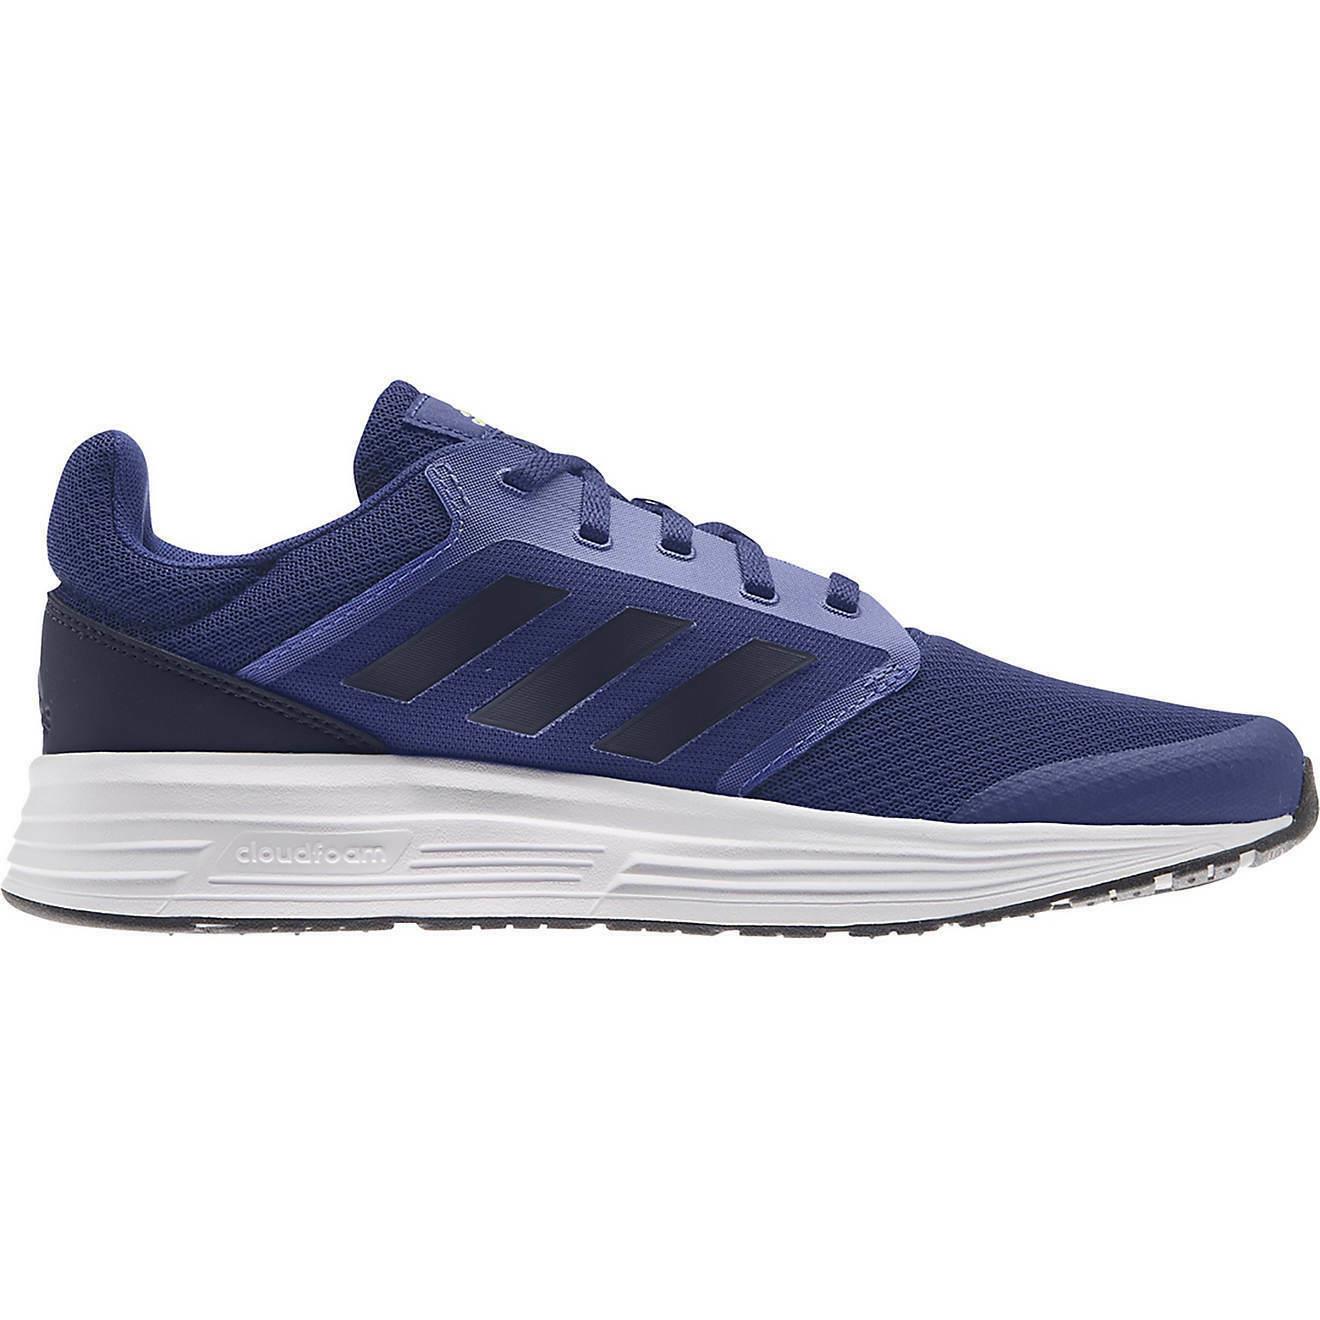 Adidas Men`s Cloudfoam Running Shoes in Sizes 6.5 to 15 Navy